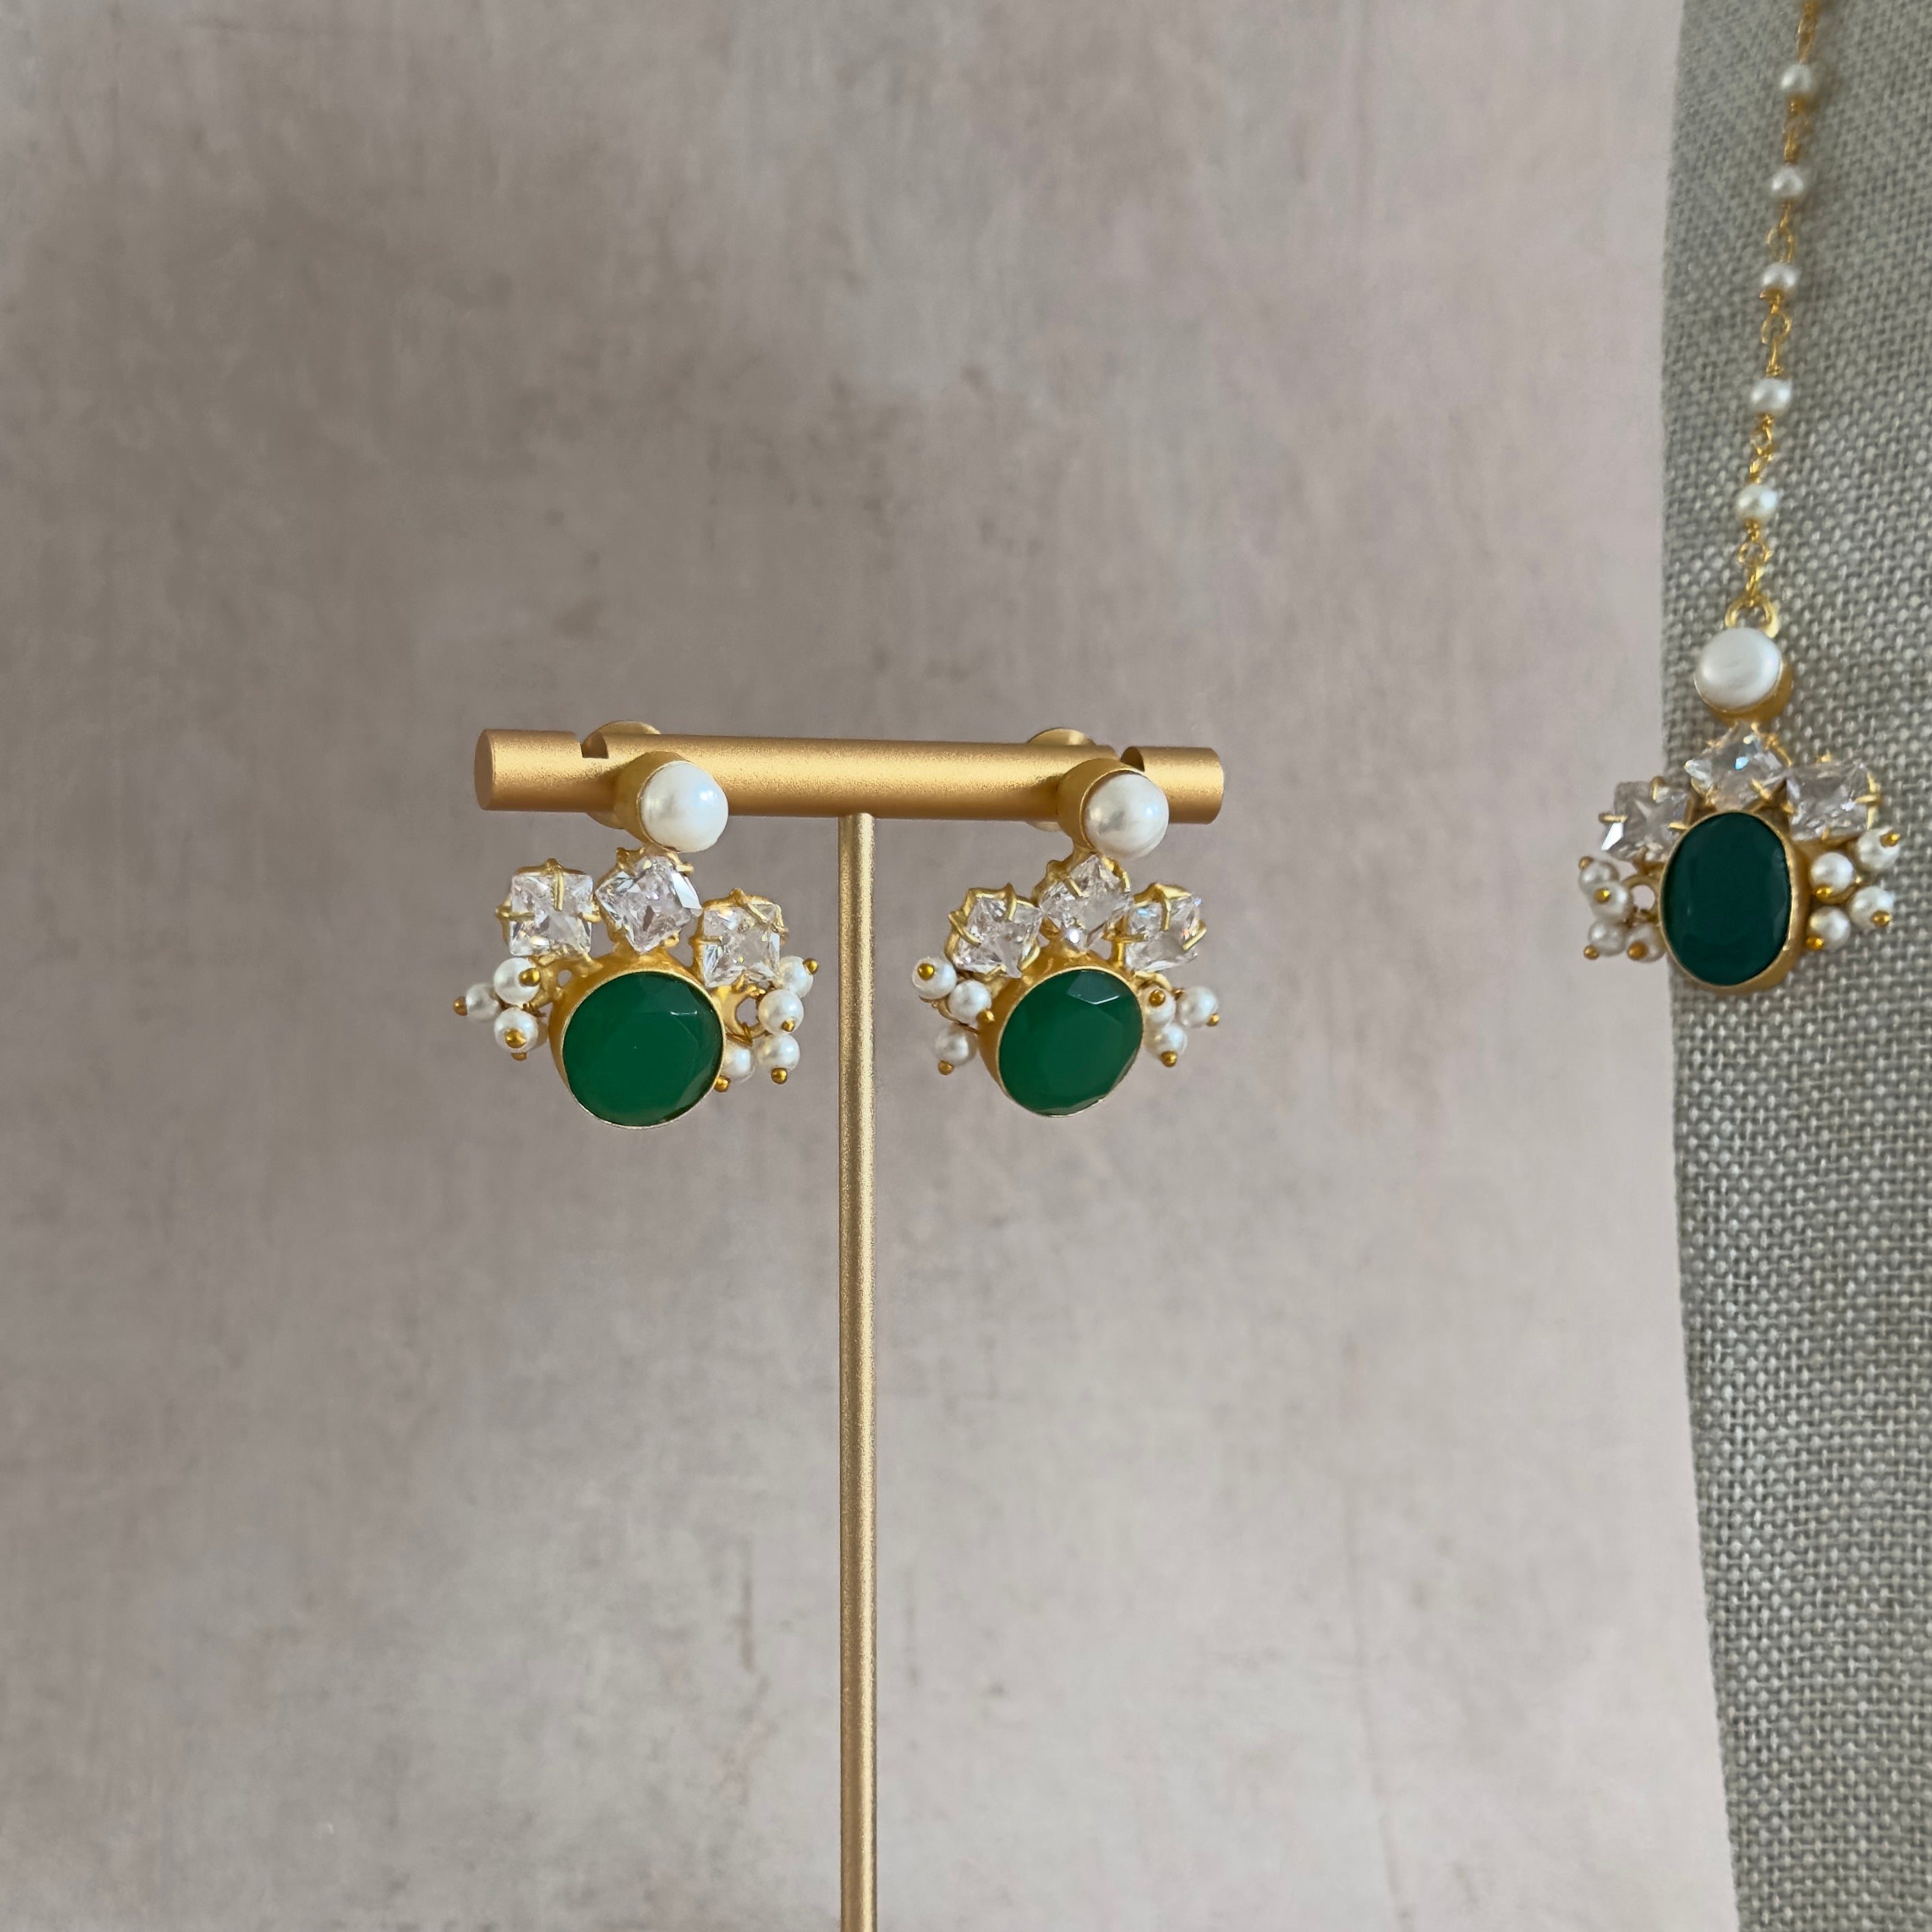 Experience the elegance of our Bisma Green Necklace Set, featuring stunning green onyx stones and freshwater pearls. The adjustable chain adds versatility, and the set comes complete with matching earrings and tikka. Elevate your look with this exclusive, sophisticated accessory.